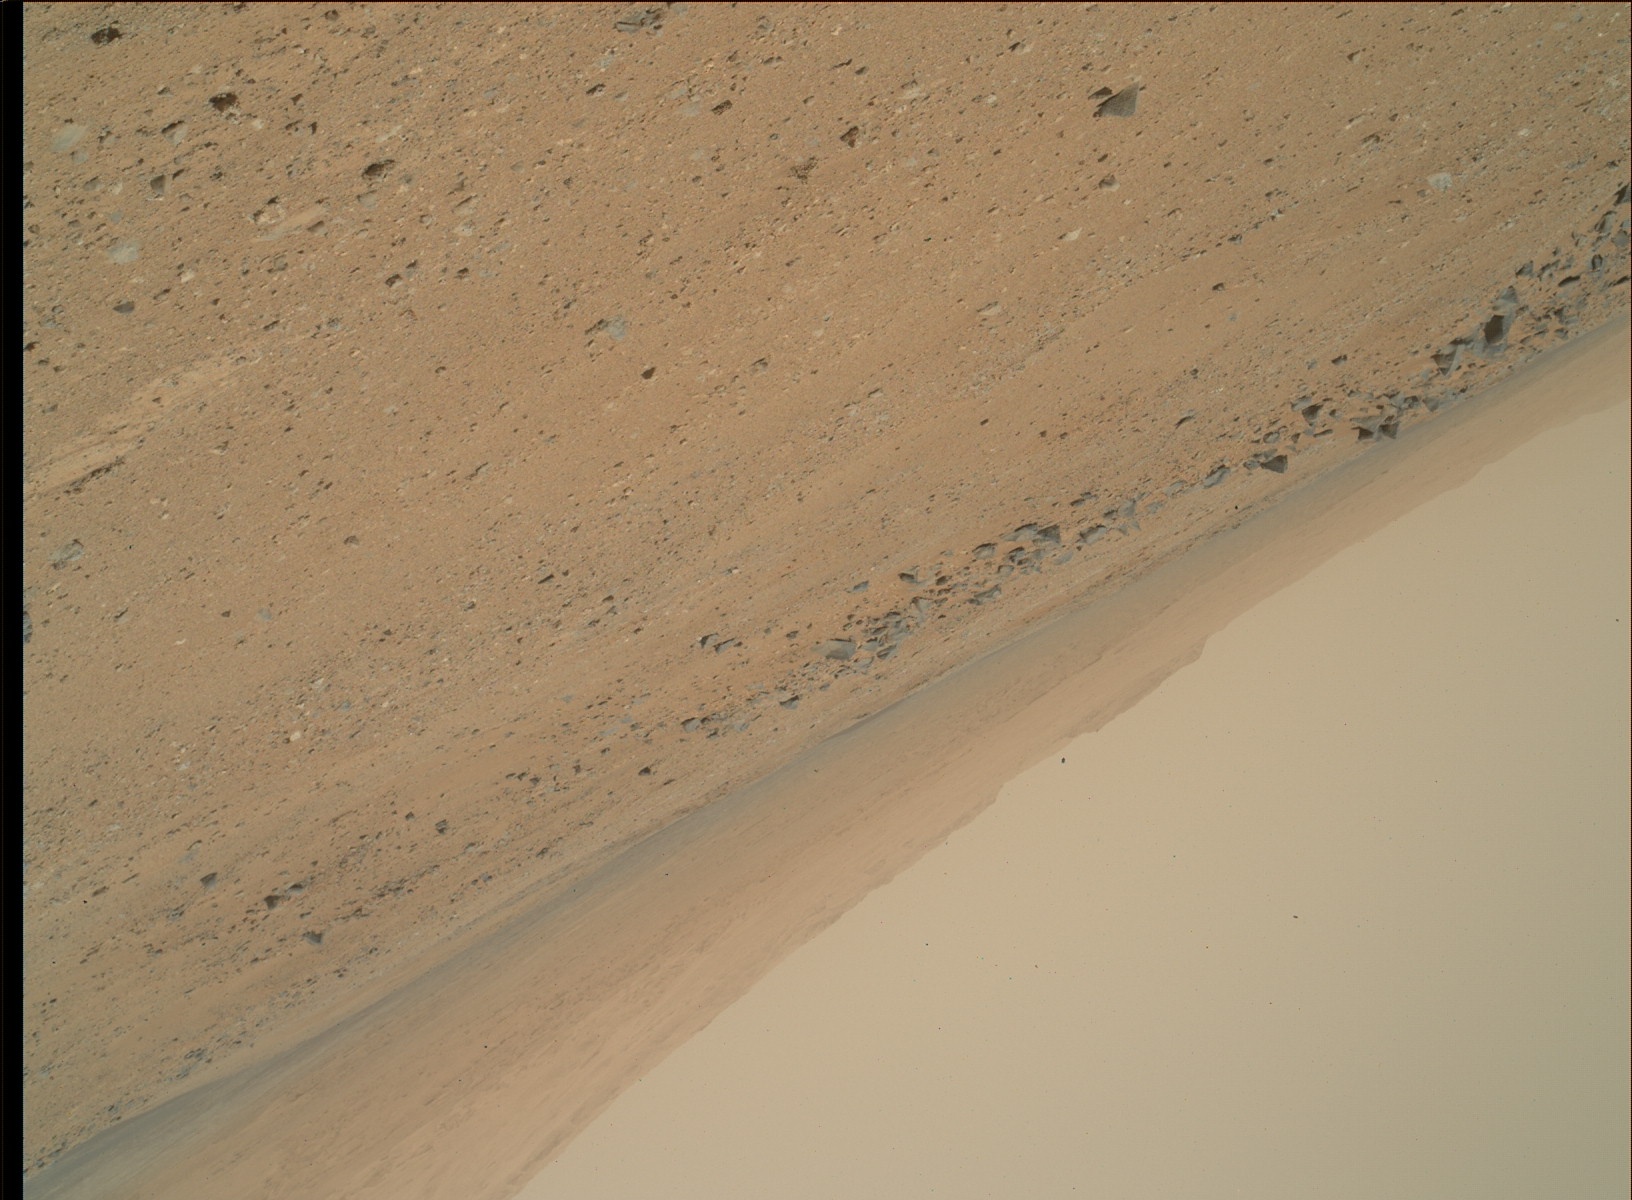 Nasa's Mars rover Curiosity acquired this image using its Mars Hand Lens Imager (MAHLI) on Sol 361